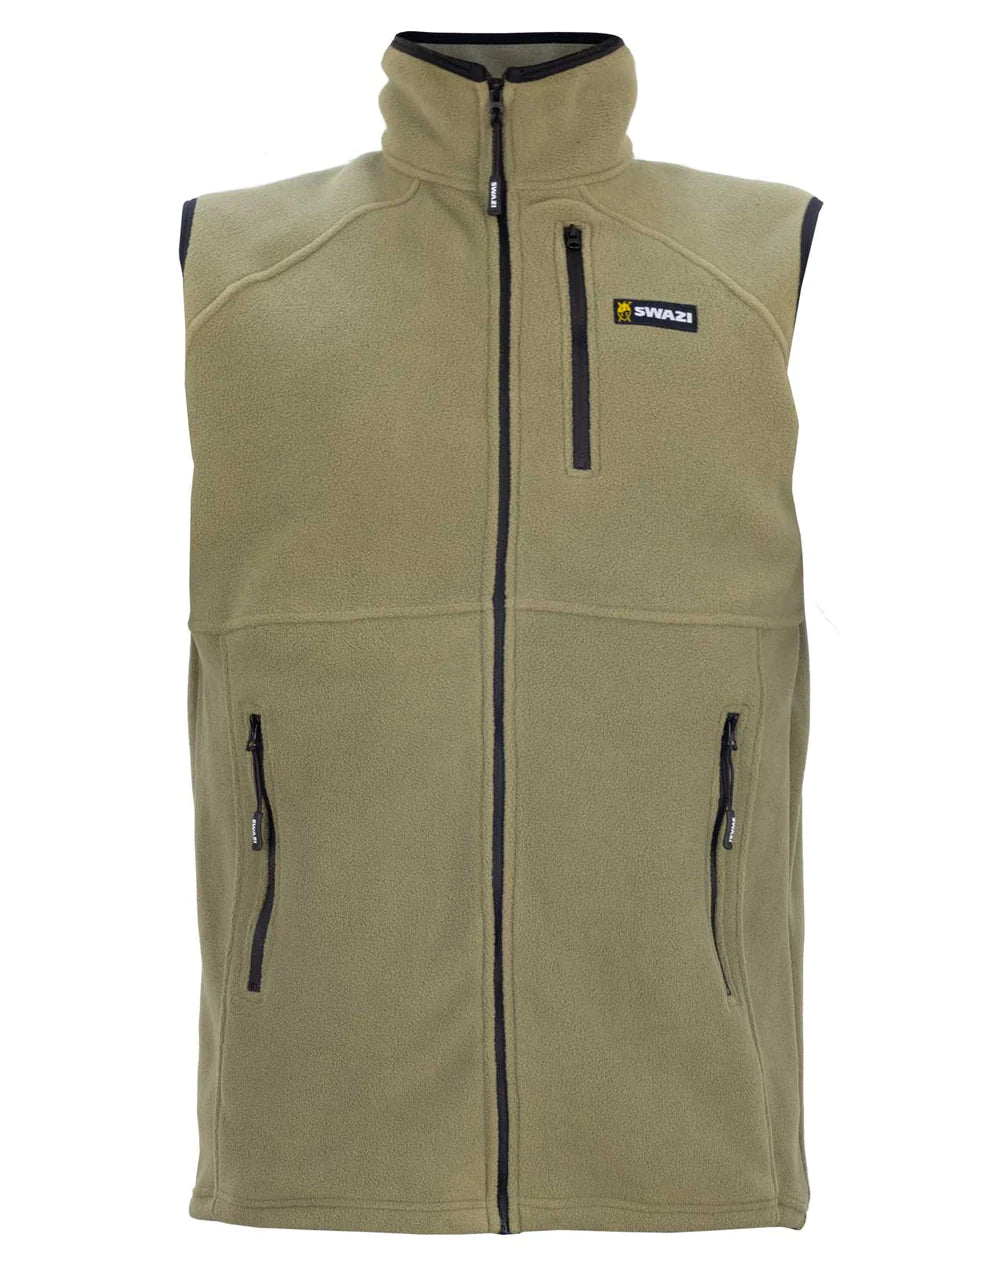 Swazi Sherpa Vest - S / TUSSOCK - Mansfield Hunting & Fishing - Products to prepare for Corona Virus